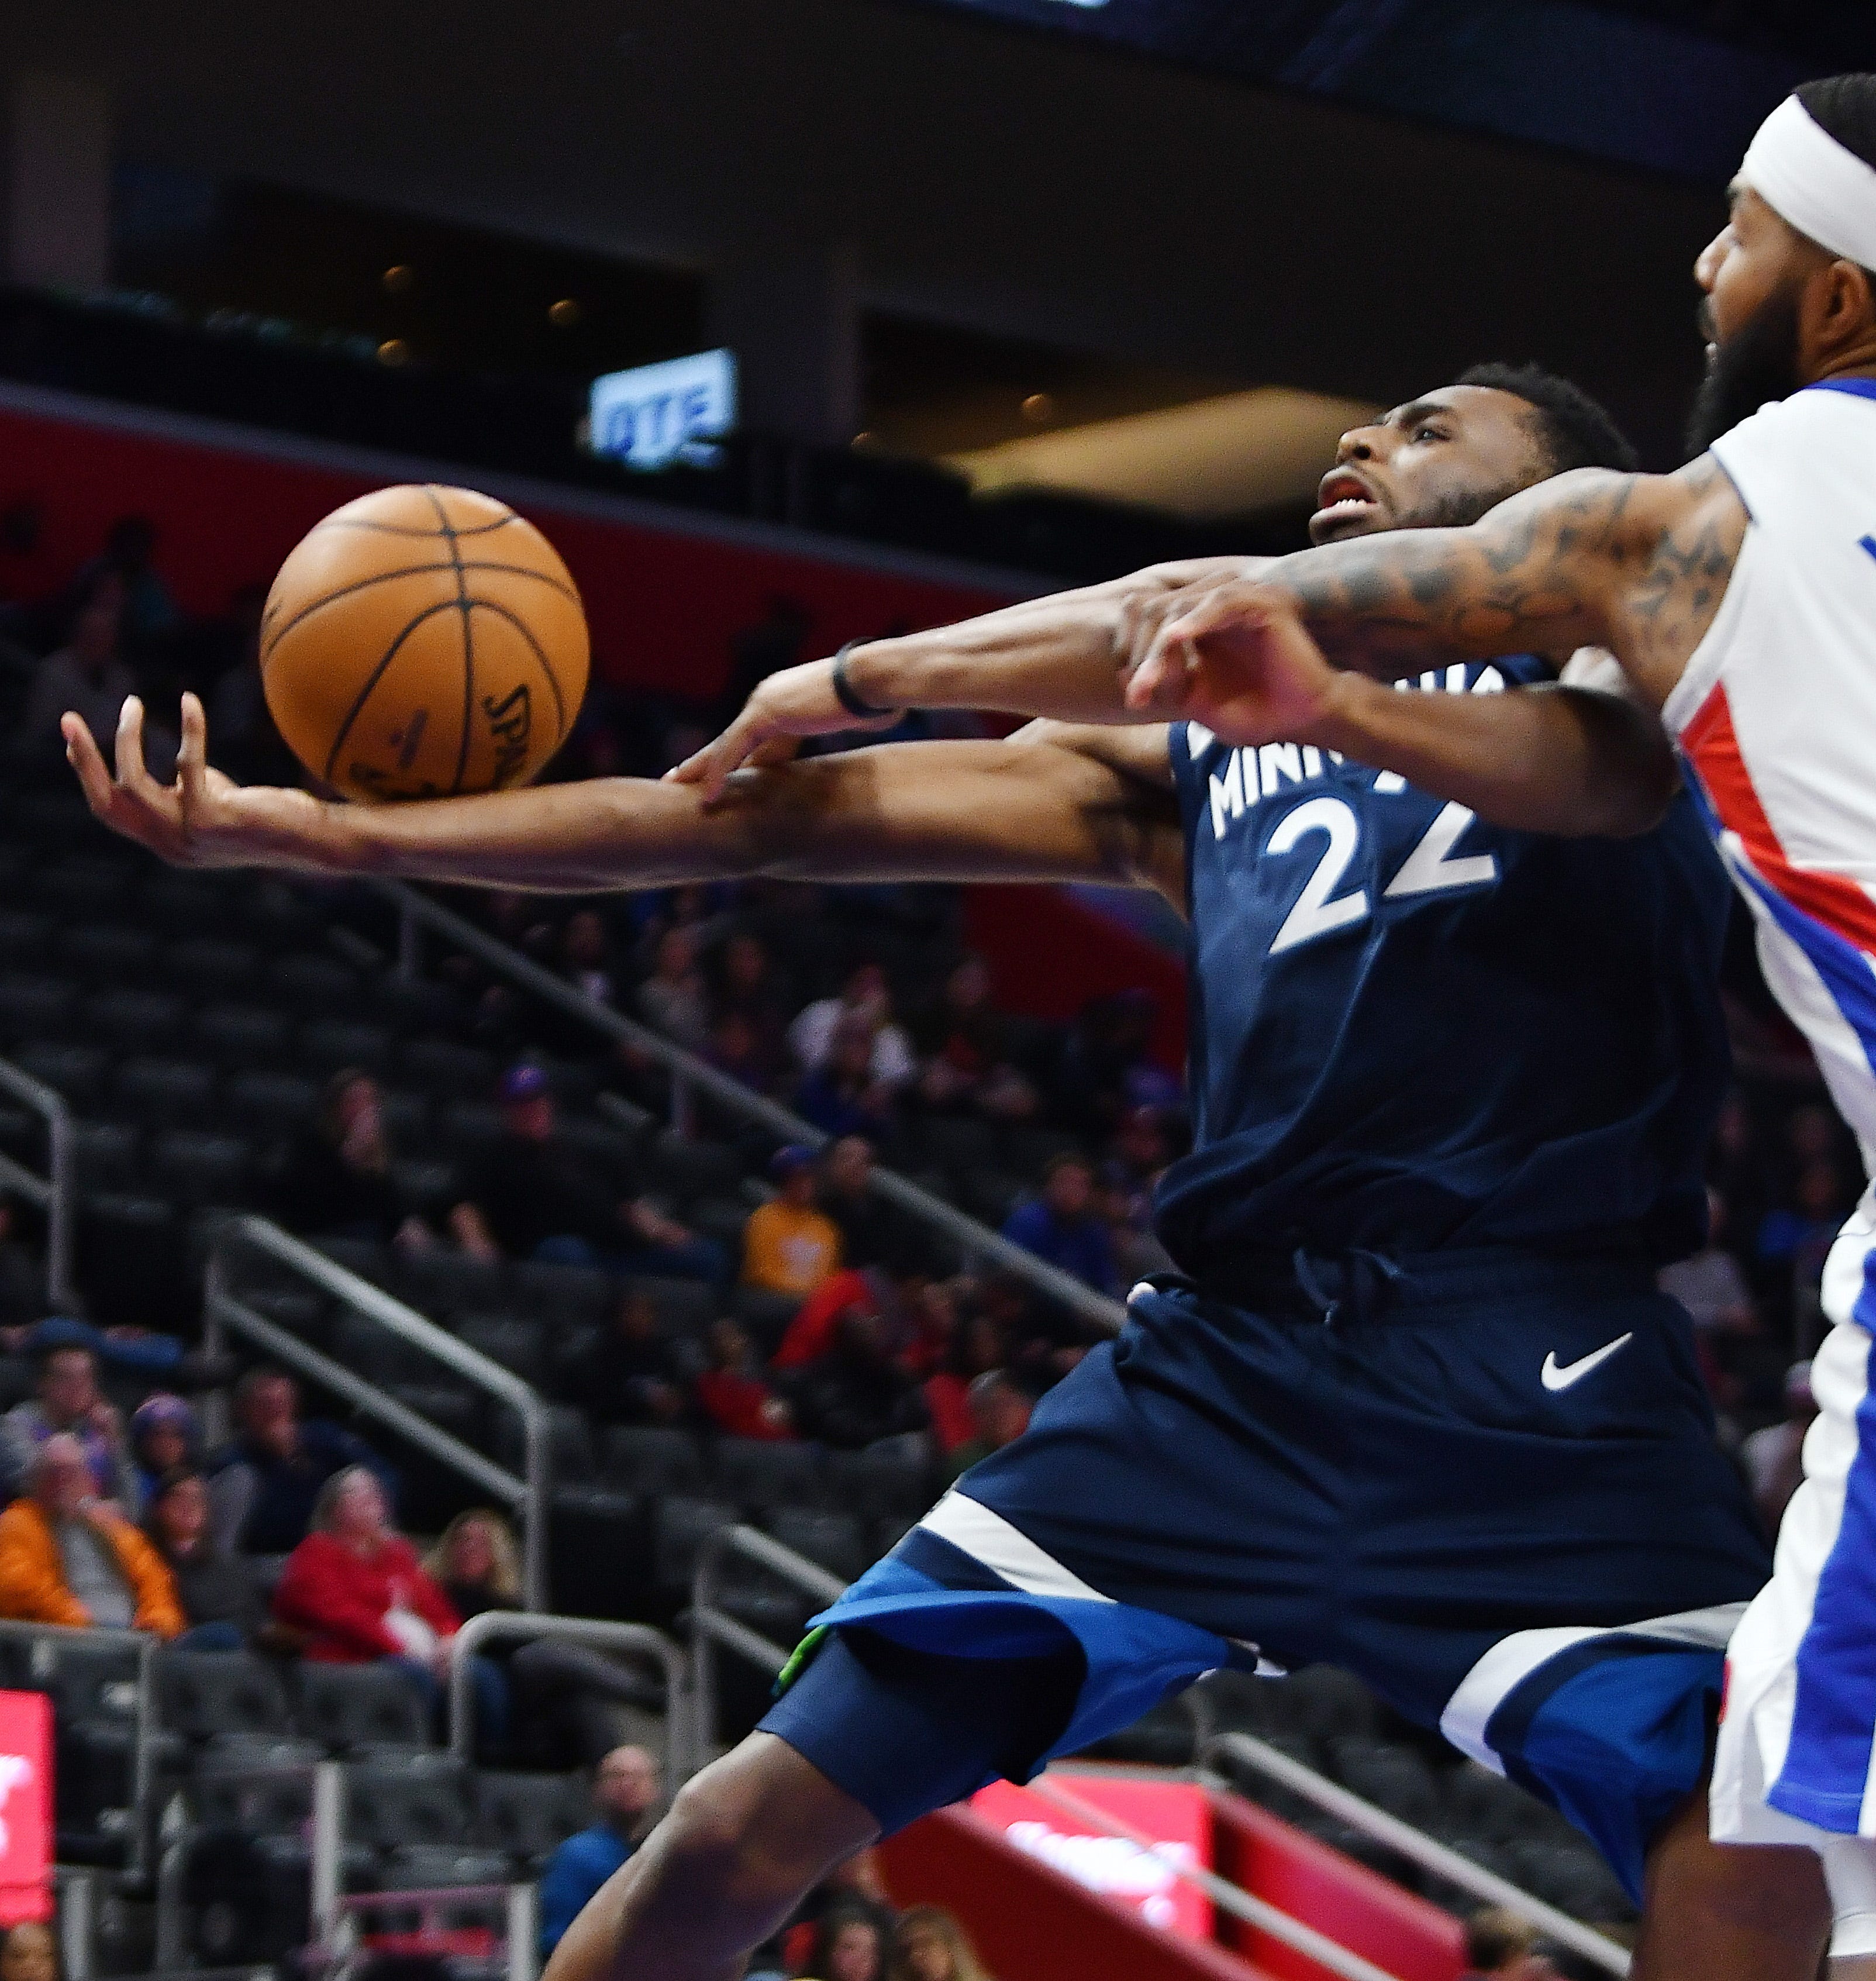 Timberwolves' Andrew Wiggins is fouled by Pistons' Markieff Morris in the fourth quarter.